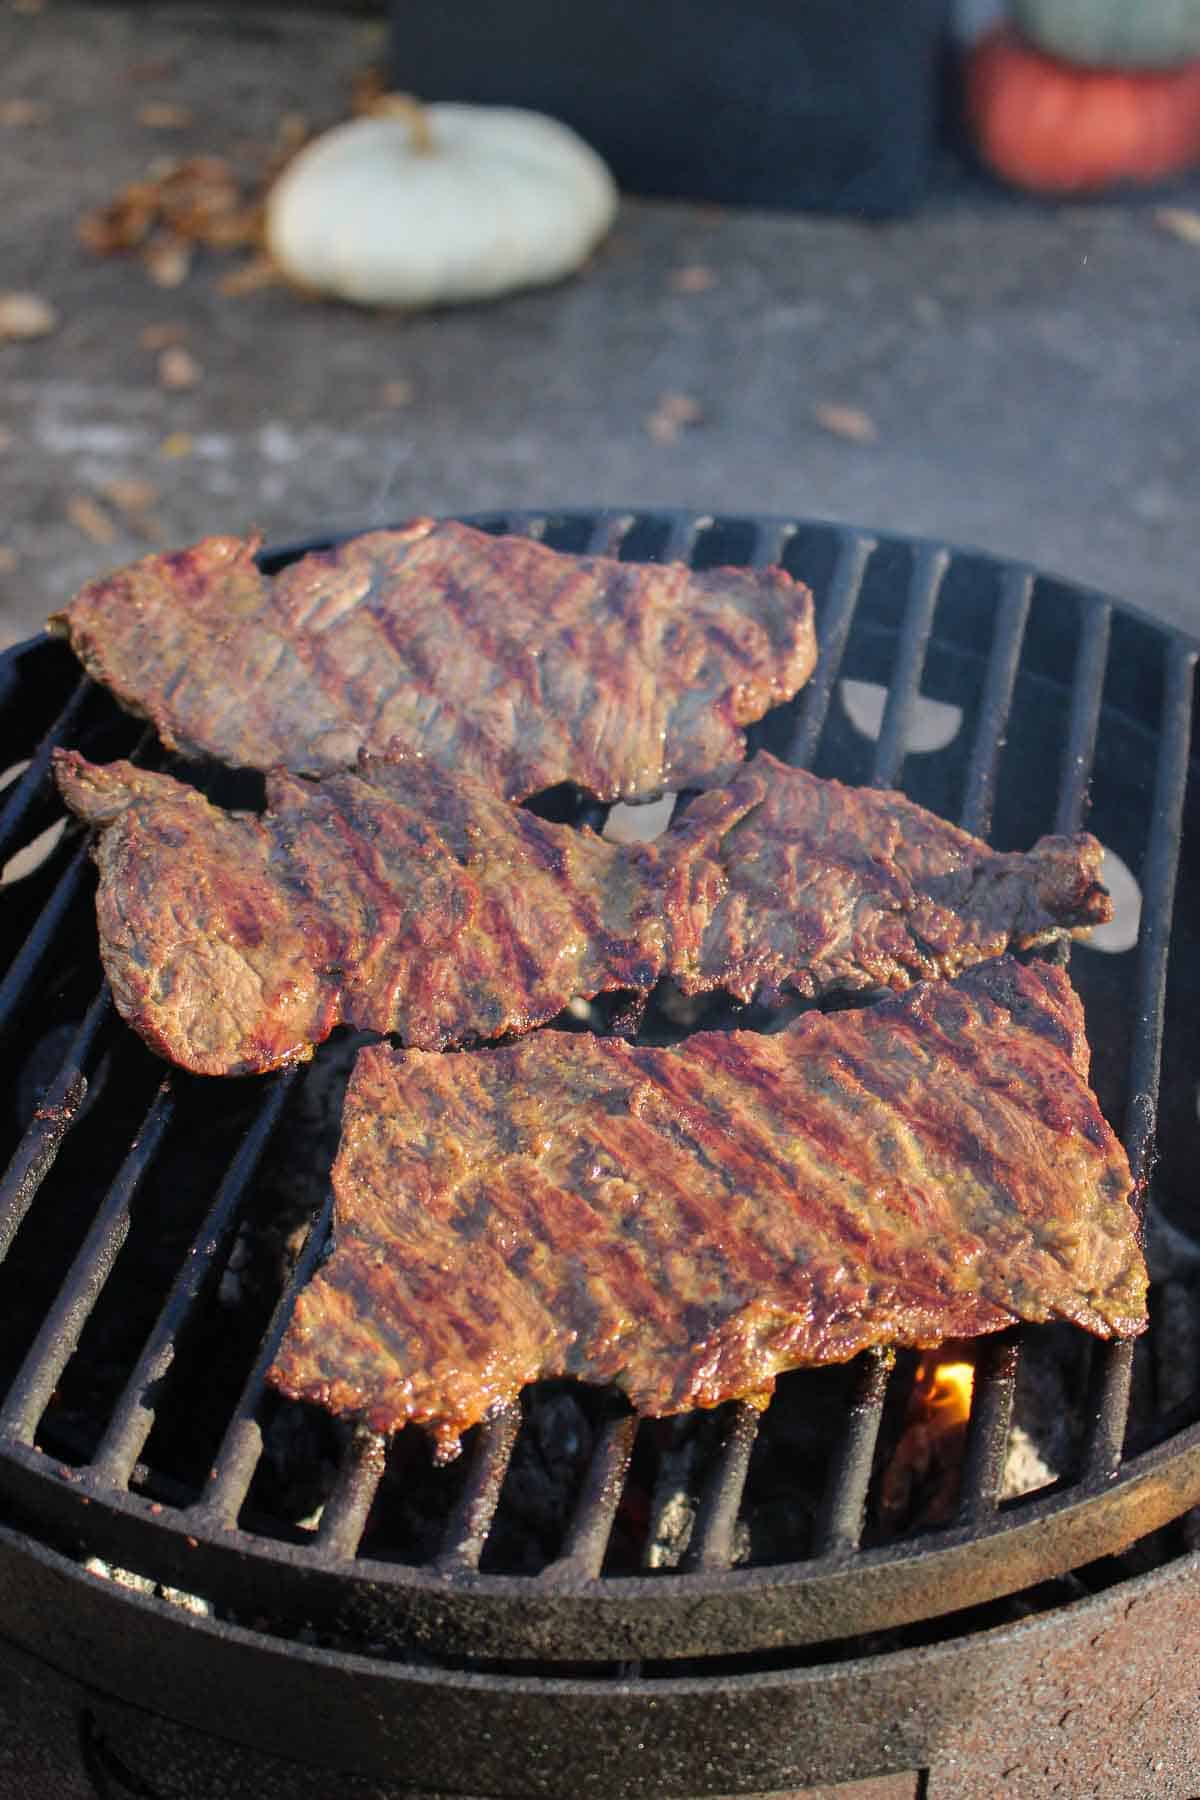 The steak being grilled for the Steak Vampiro Tacos.